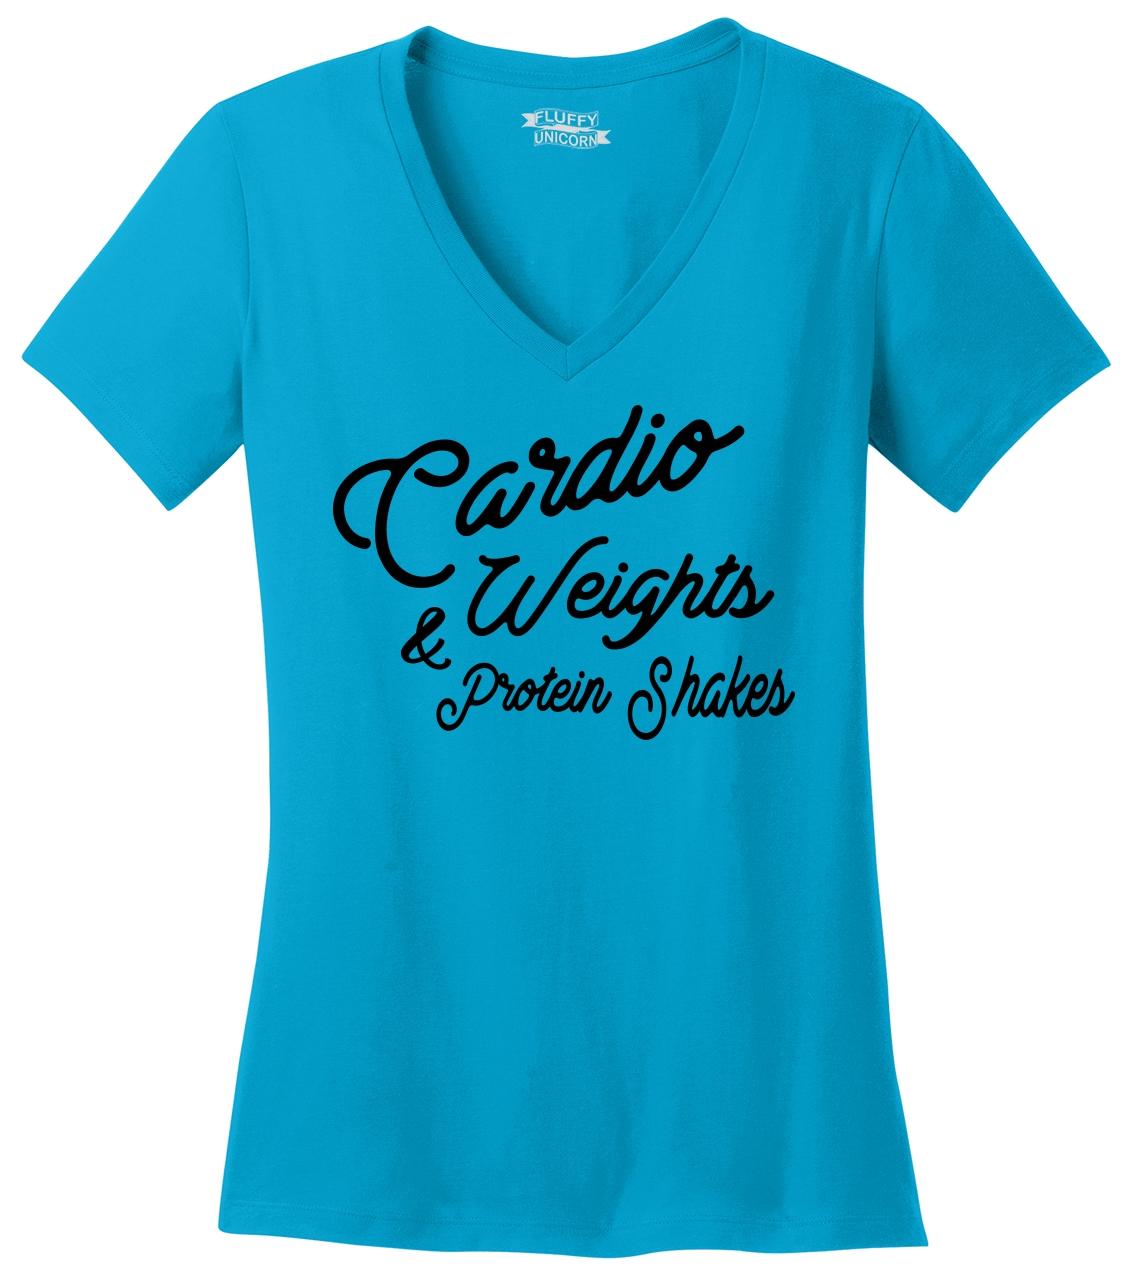 Cardio Weights Protein Shakes Ladies V-Neck T Shirt ...